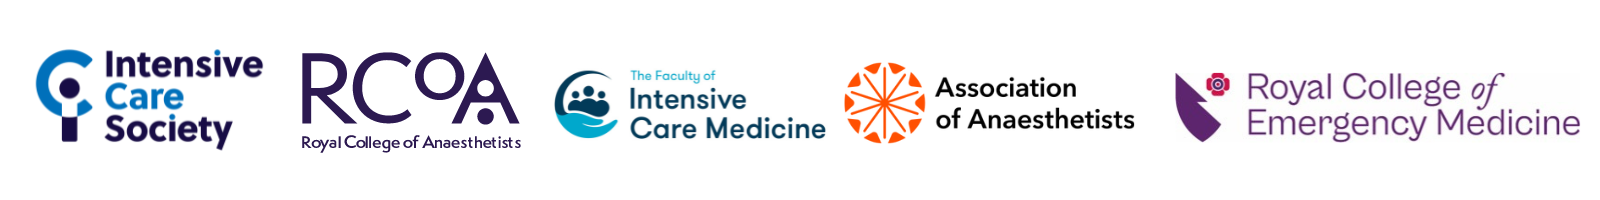 The logos for the Intensive Care Society, RCoA, FICM, Association of Anaesthetists and RCEM.